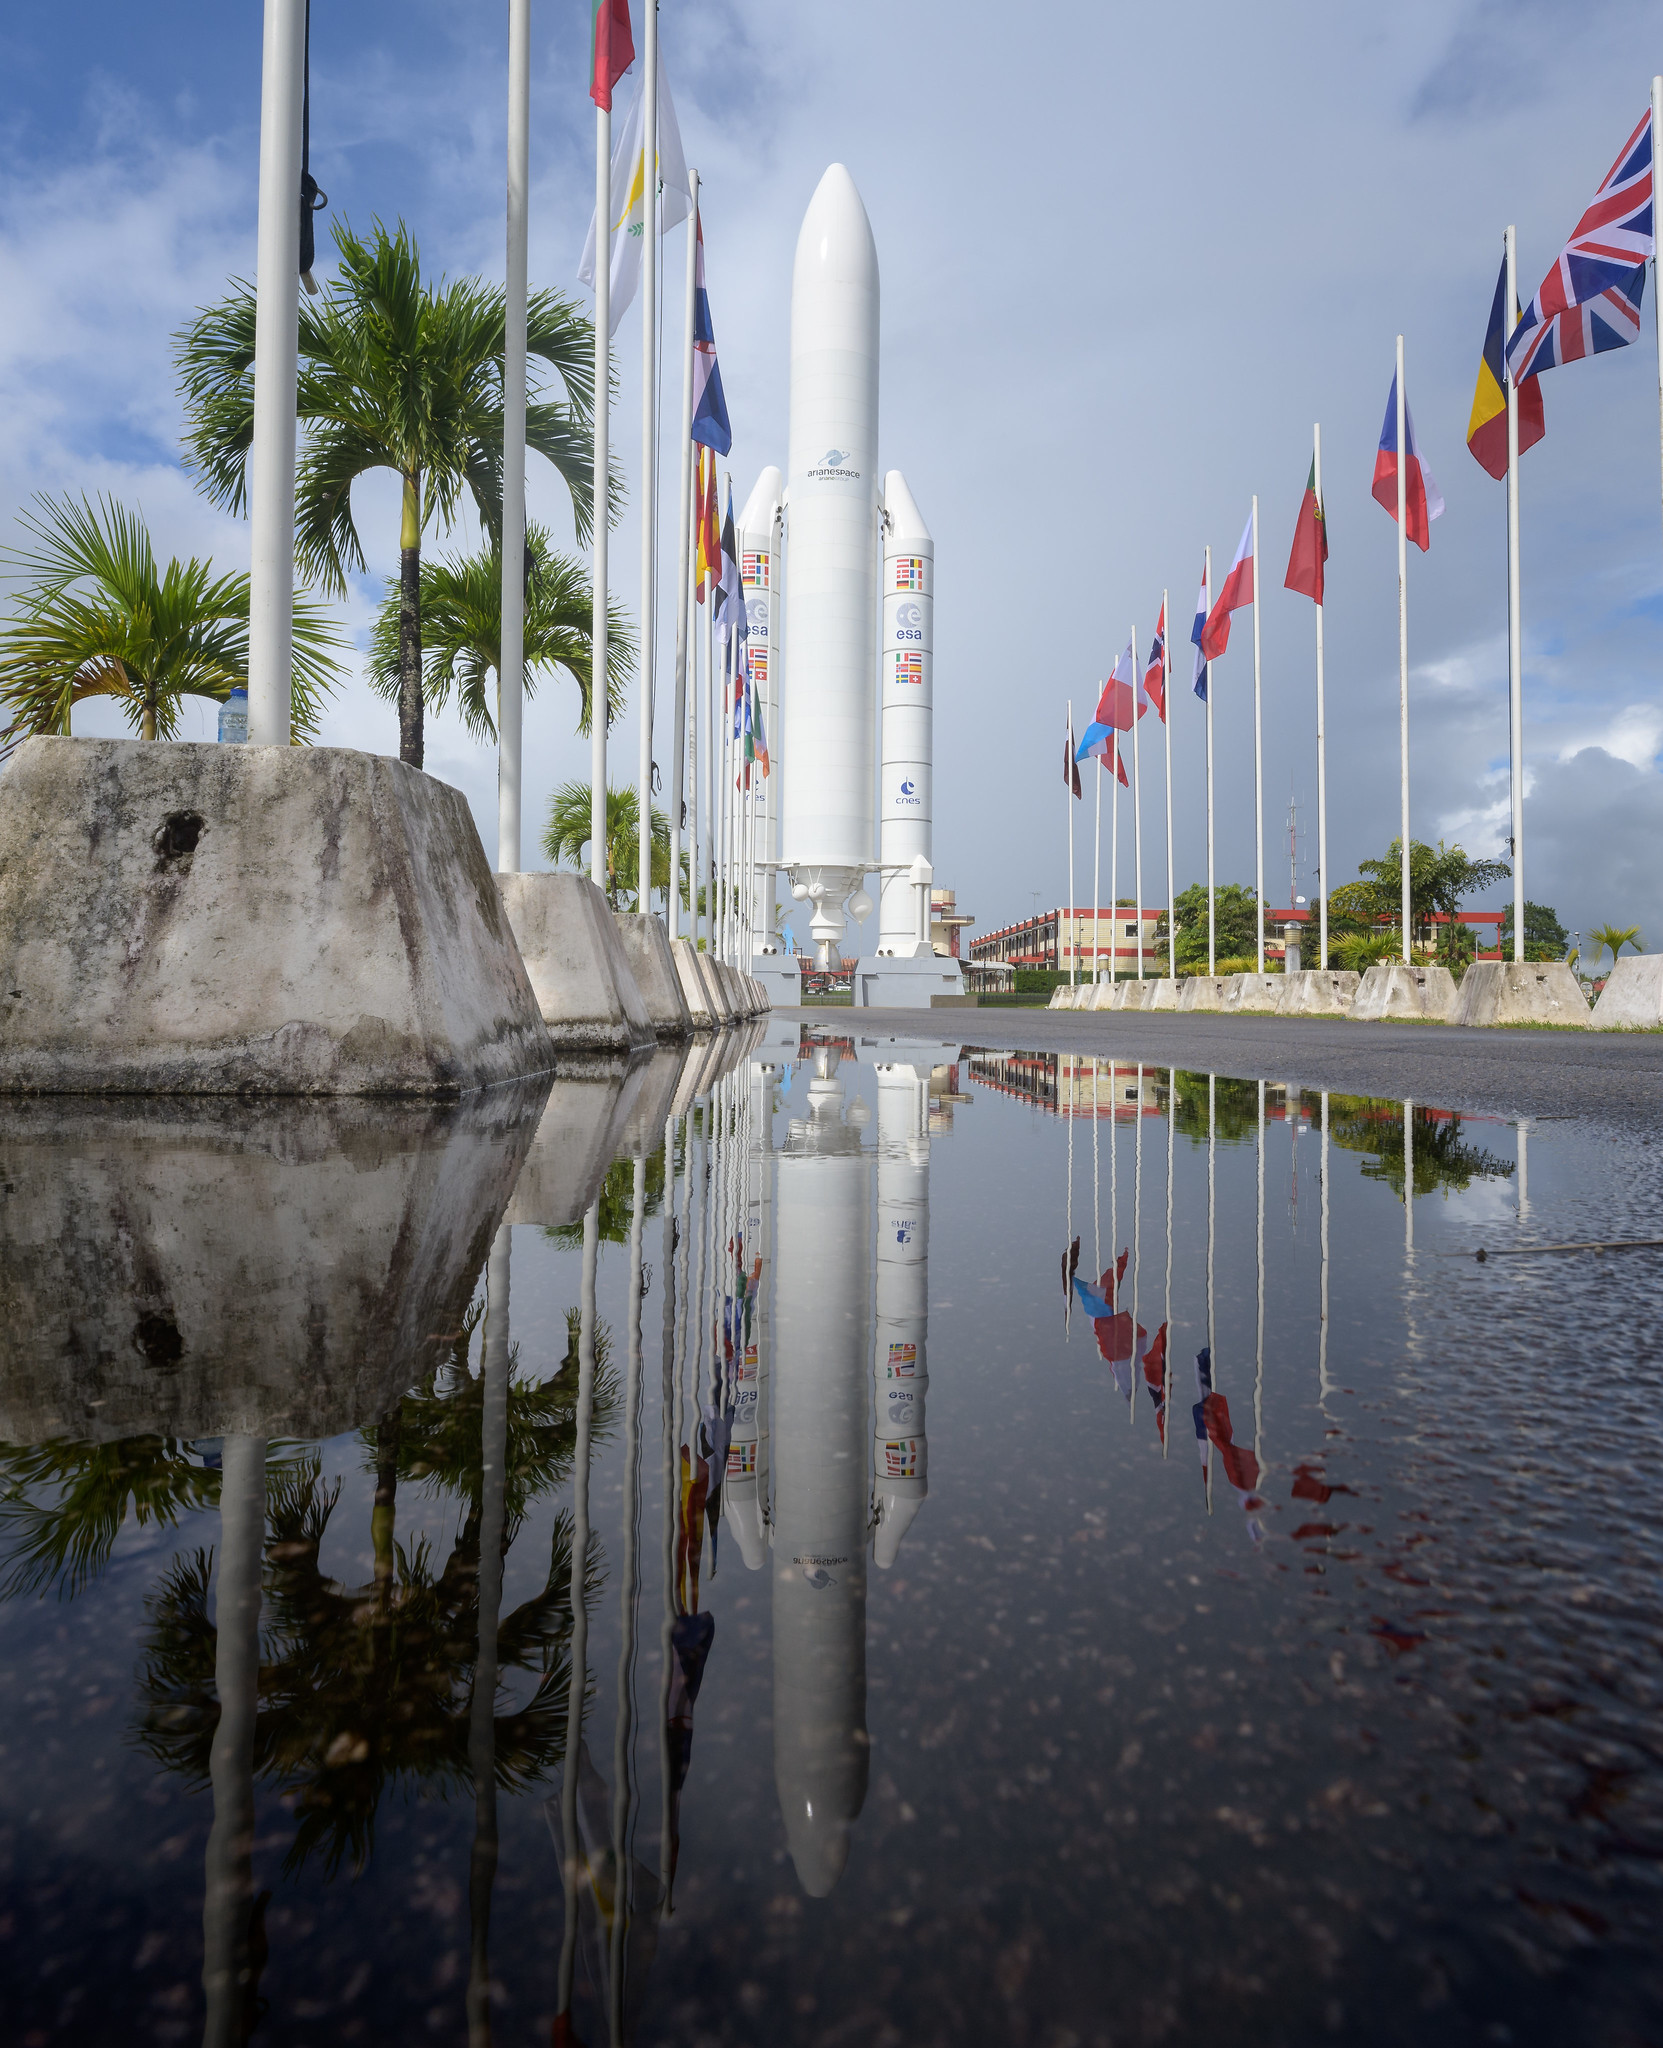 A mockup of Arianespace's Ariane 5 rocket is seen at the entrance to the Guiana Space Center in Kourou, French Guiana, Tuesday, Dec. 21, 2021.